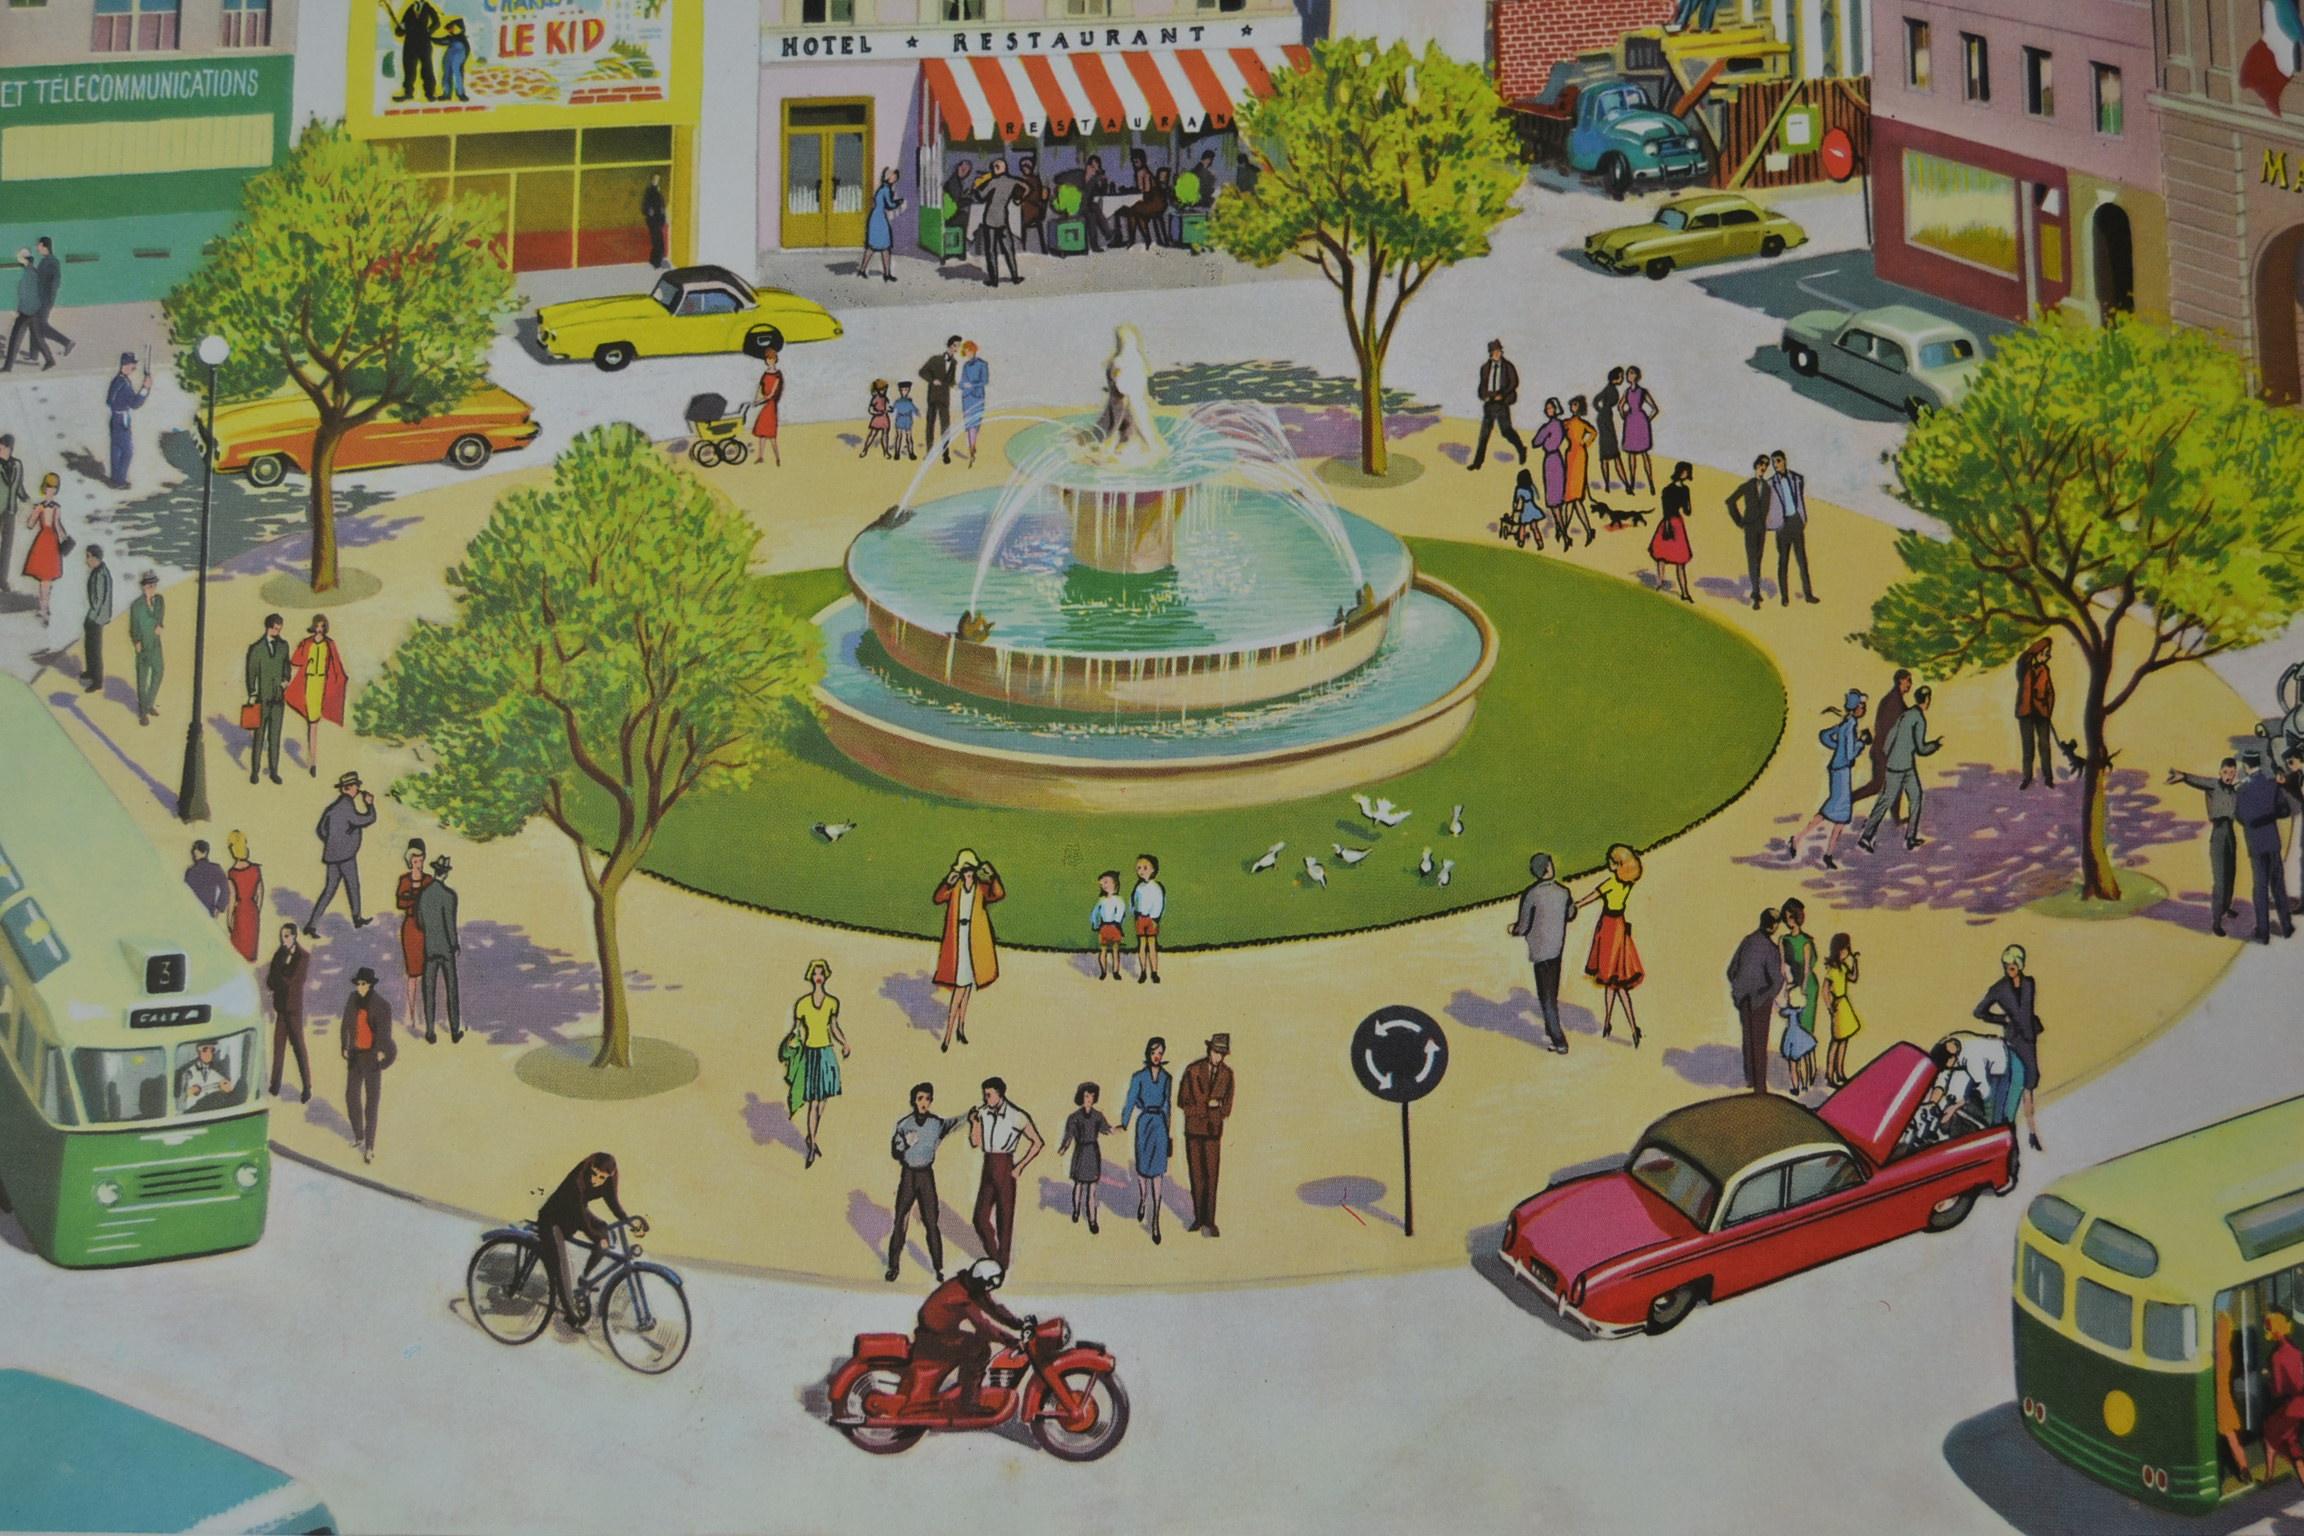 Vintage school chart: At the square, plaza .
Great view on a plaza:
Big roundabout with a fountain in the middle surrounded with trees,
traffic on the roundabout like cars, motorbikes, busses, bikes, pedestrians and also collapse and a car